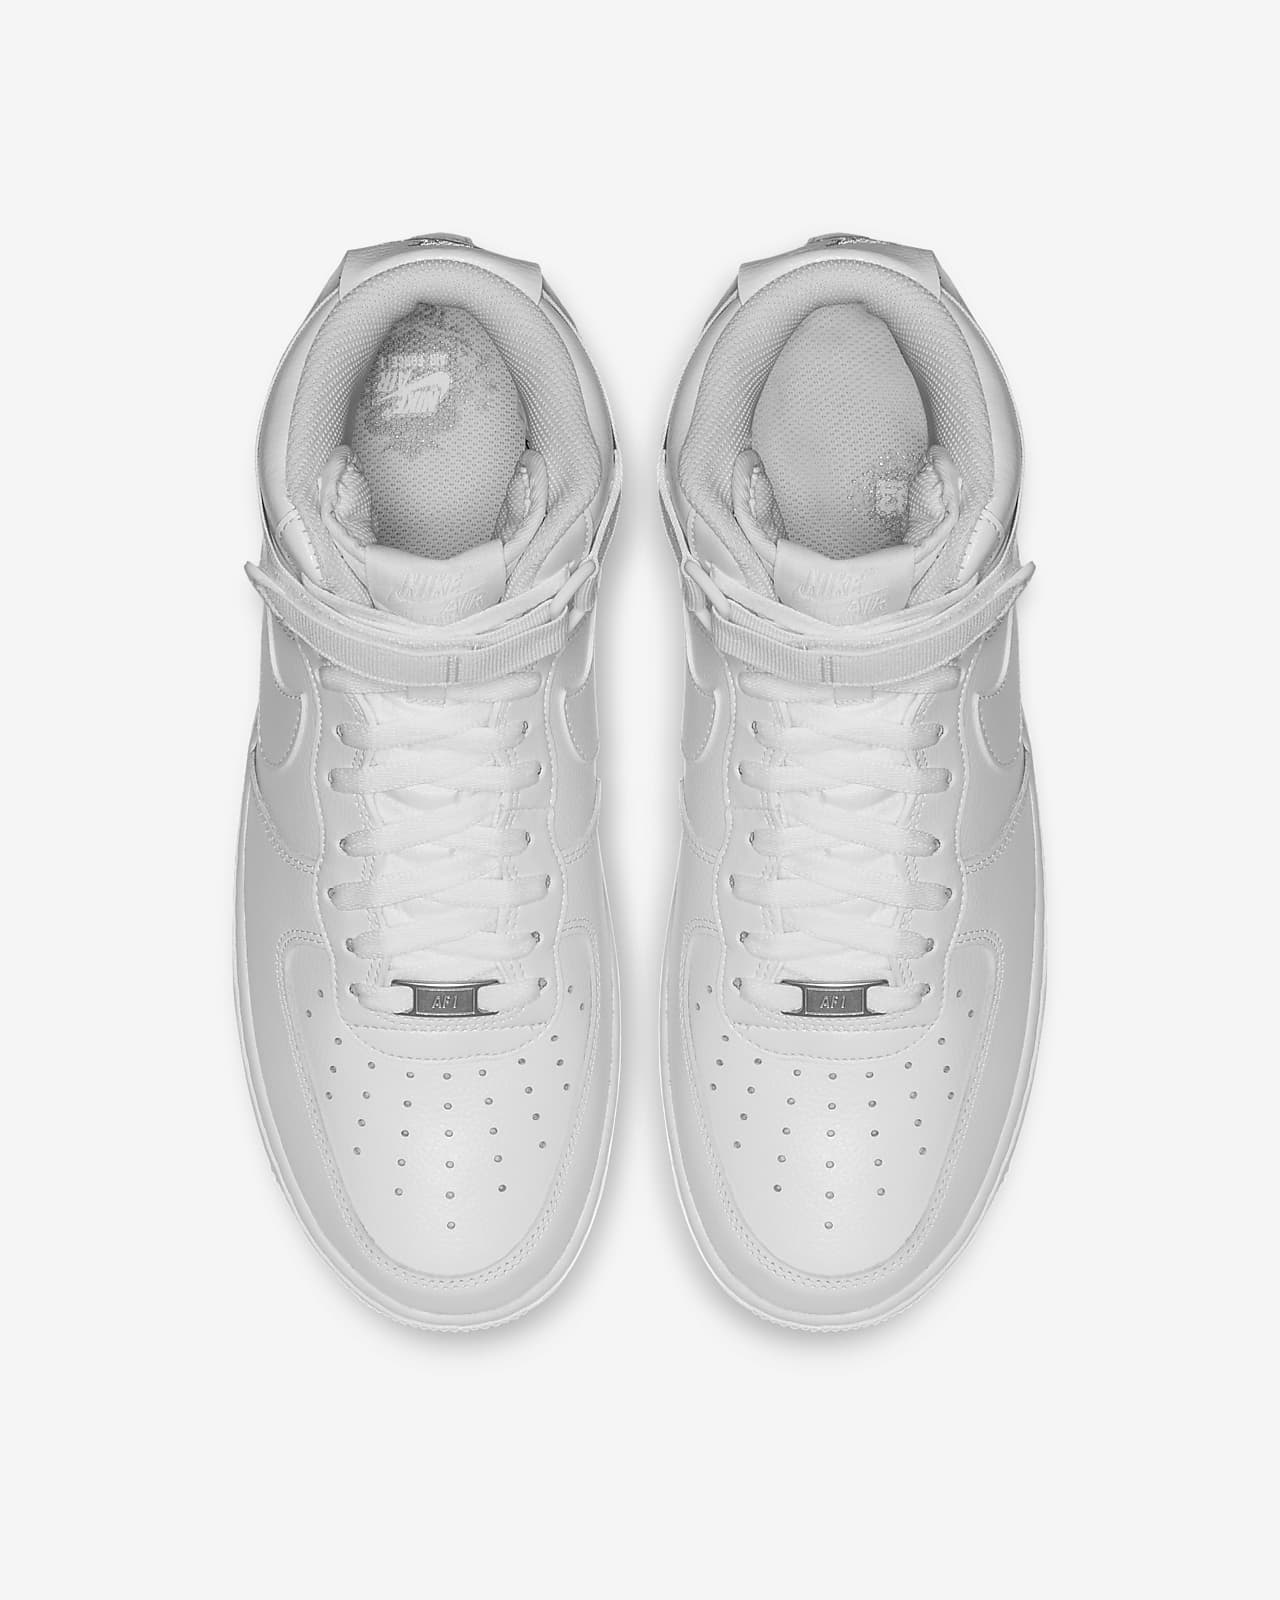 top view of air force 1